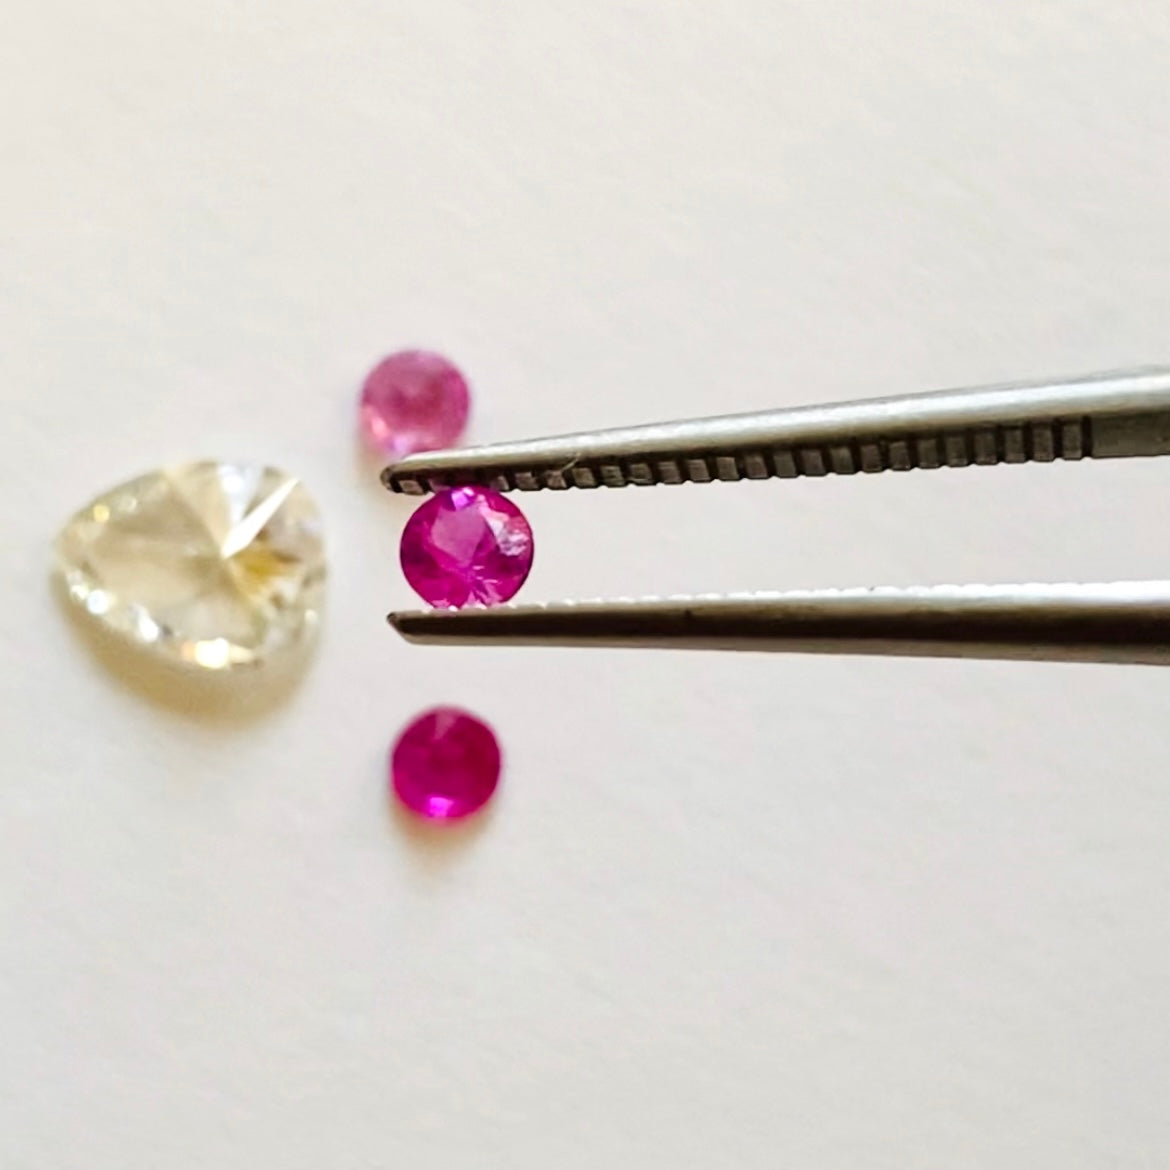 Round Pink Sapphire held in tweezers above pear shaped white diamond and two round fuchsia pink sapphire gem stones shown on white background